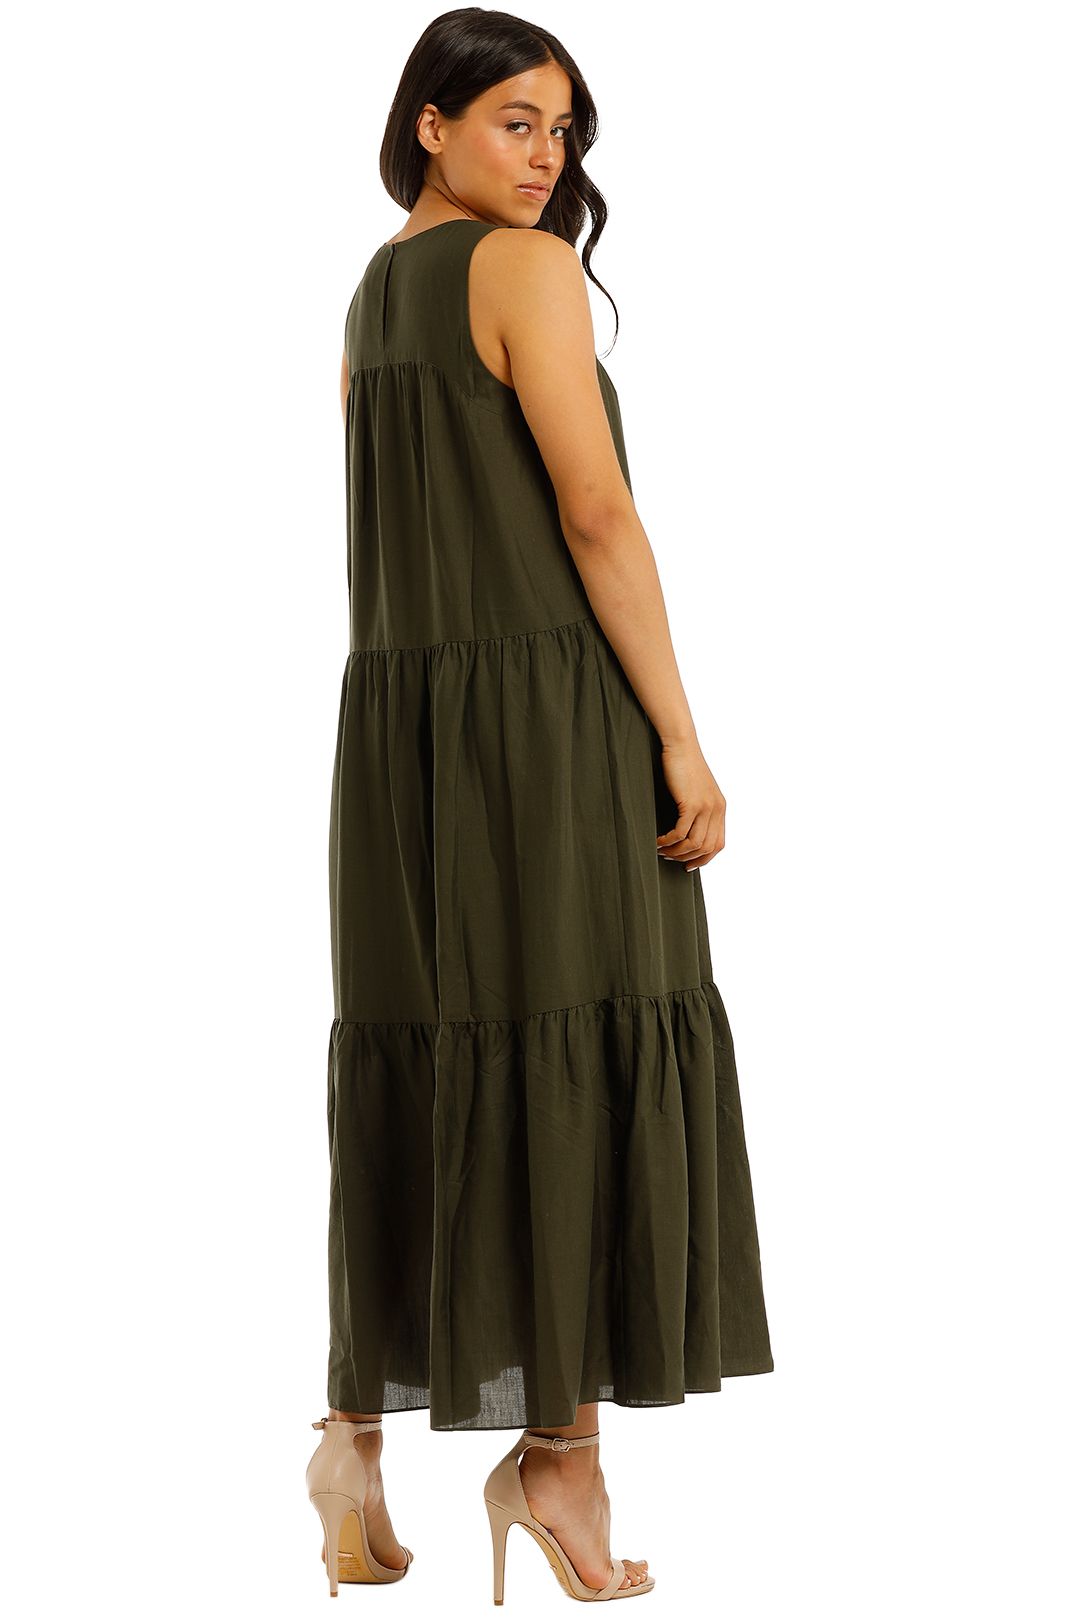 Yoke Tiered Dress in Fern by Witchery for Hire | GlamCorner